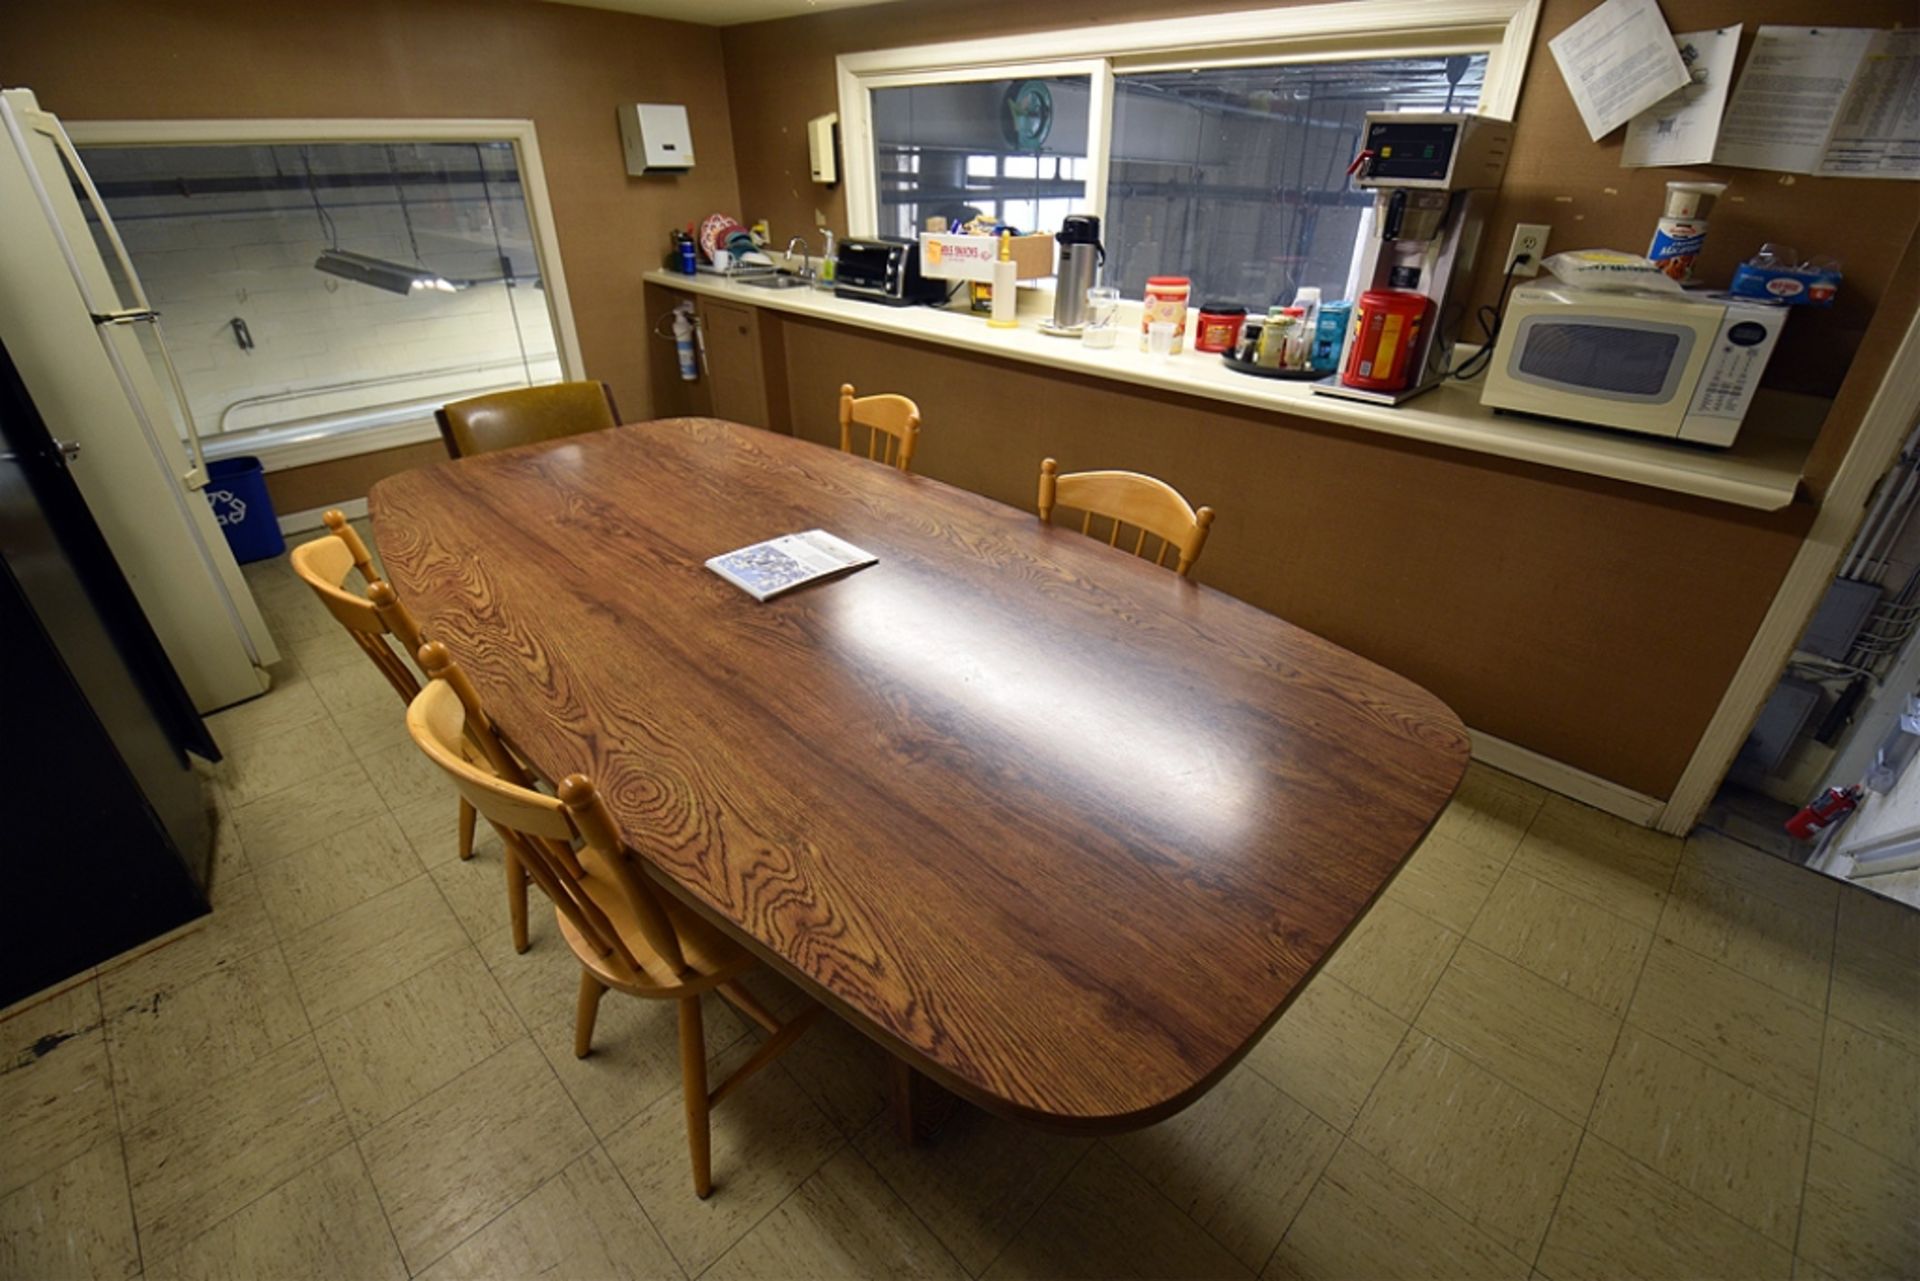 Employee Breakroom Consisting Of: Table, Chairs etc.